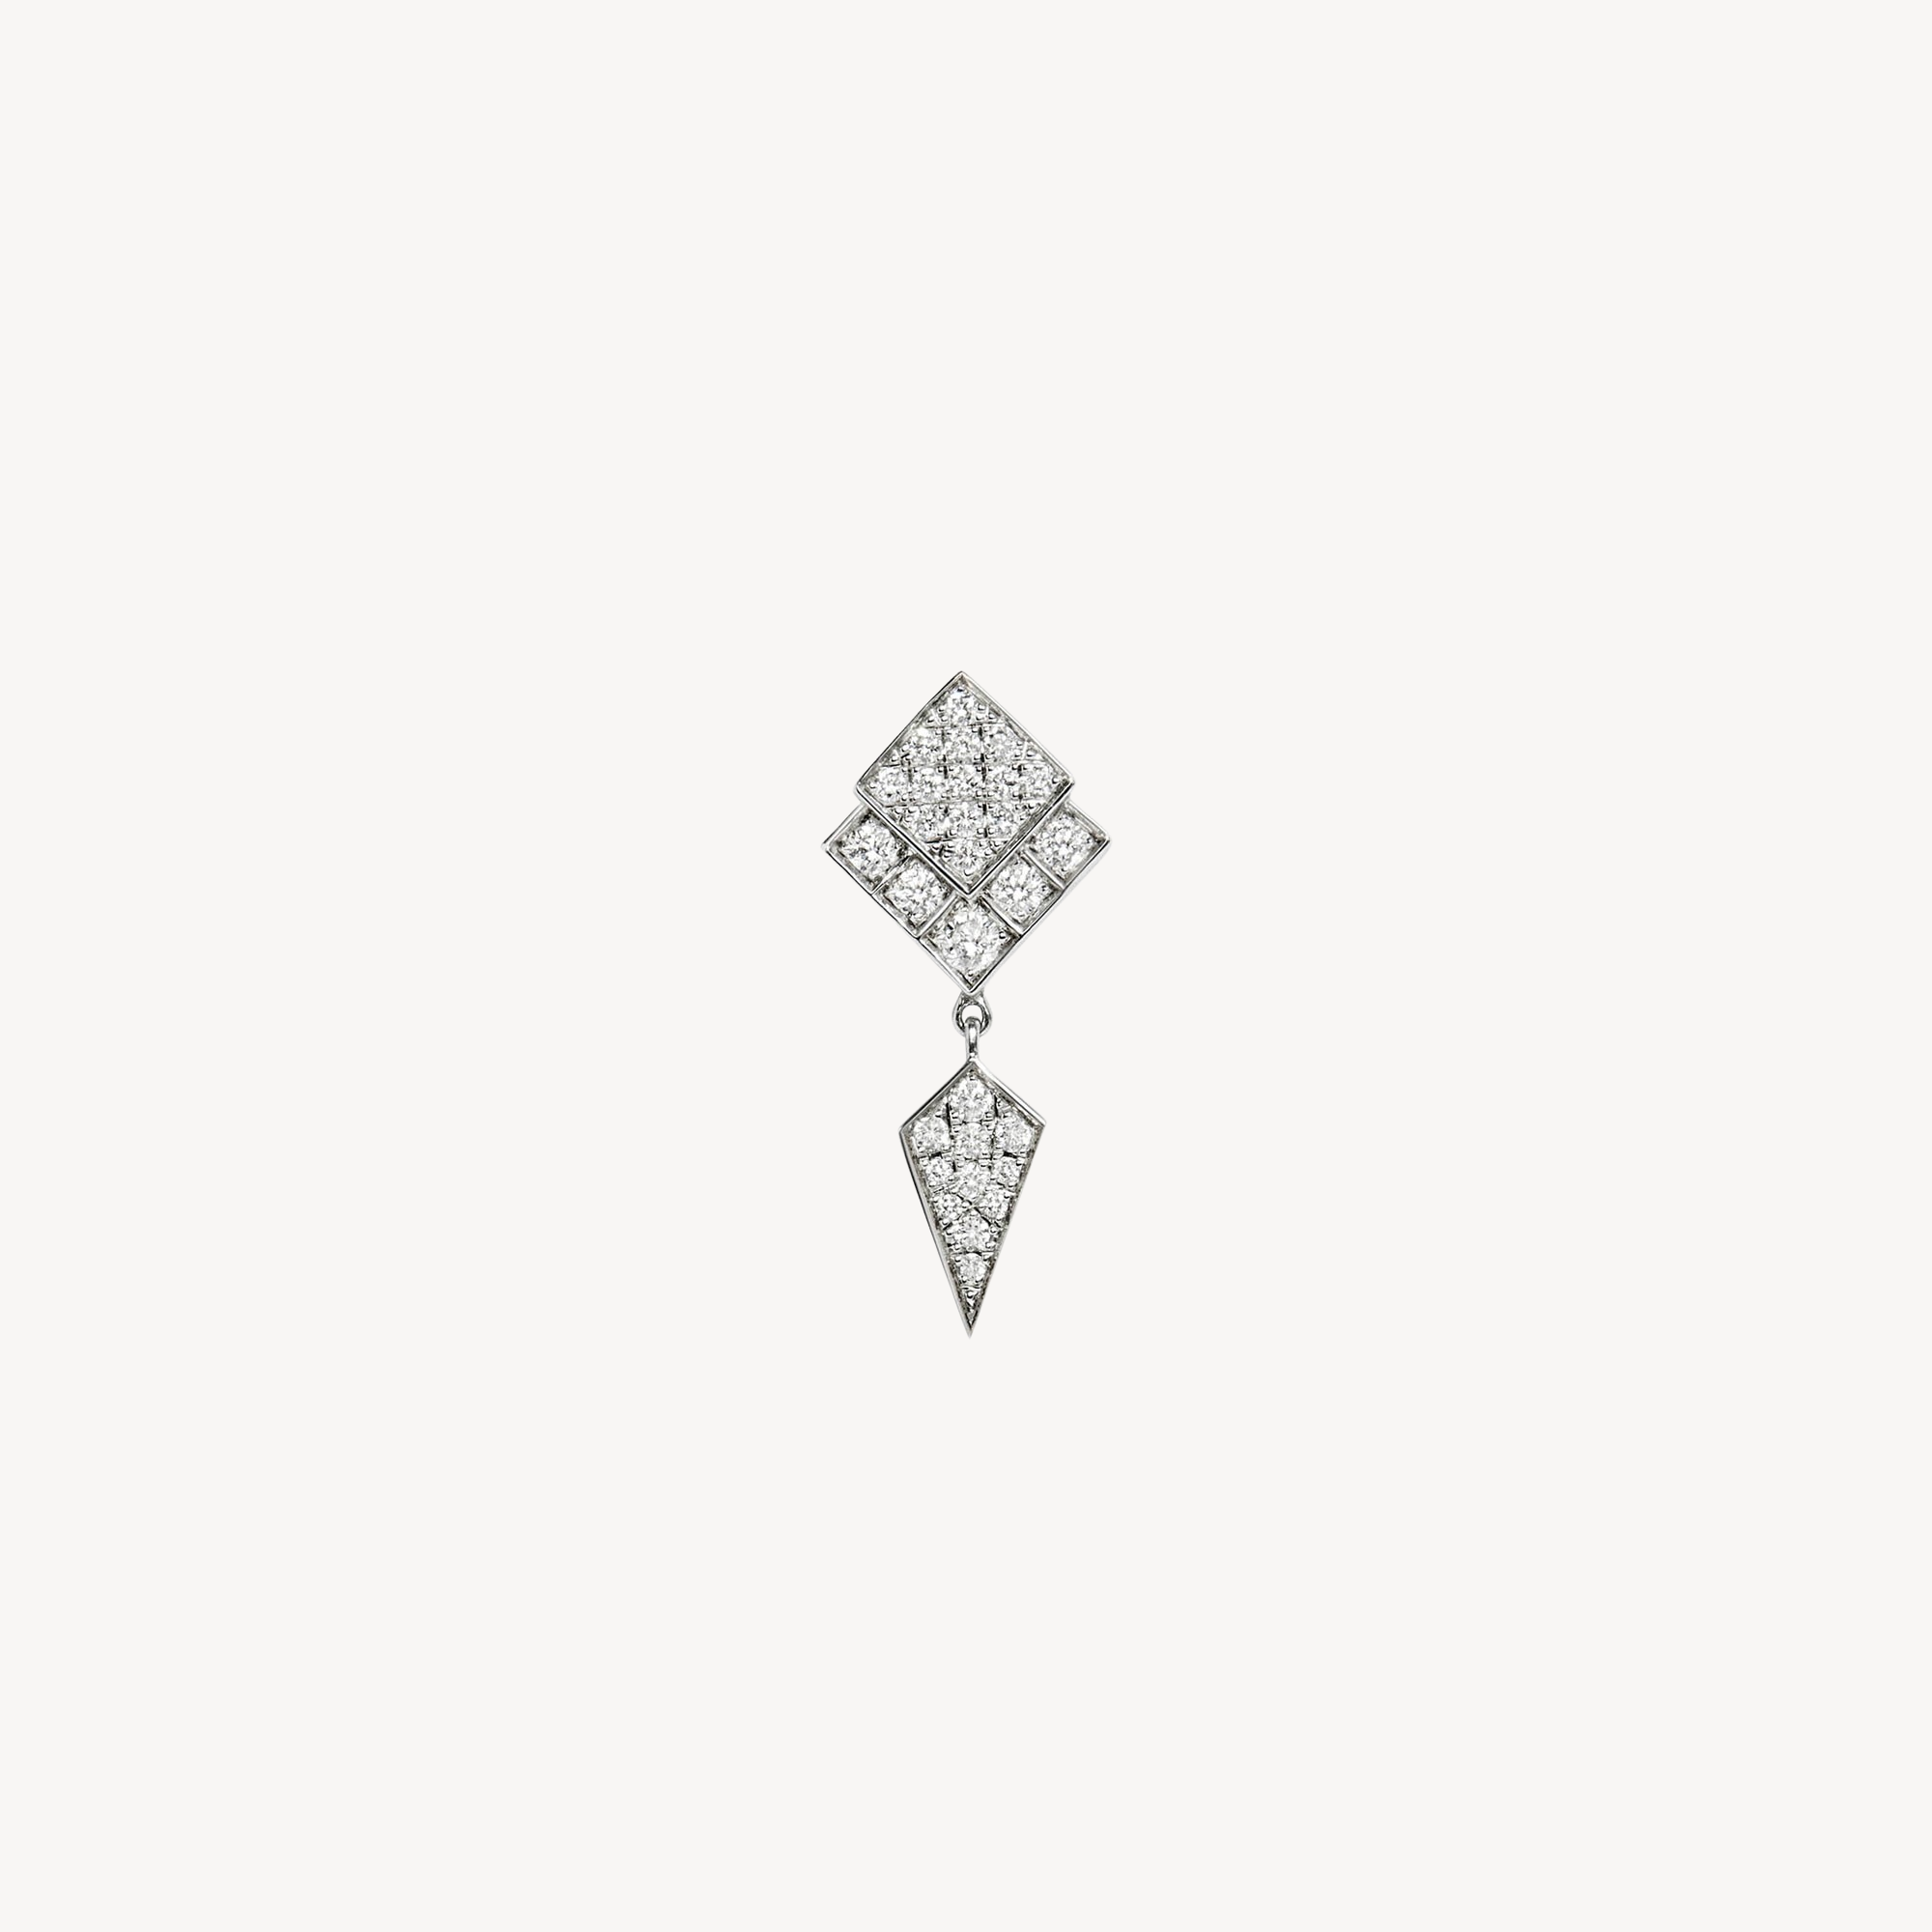 Diamonds and Silver Stairway Earring